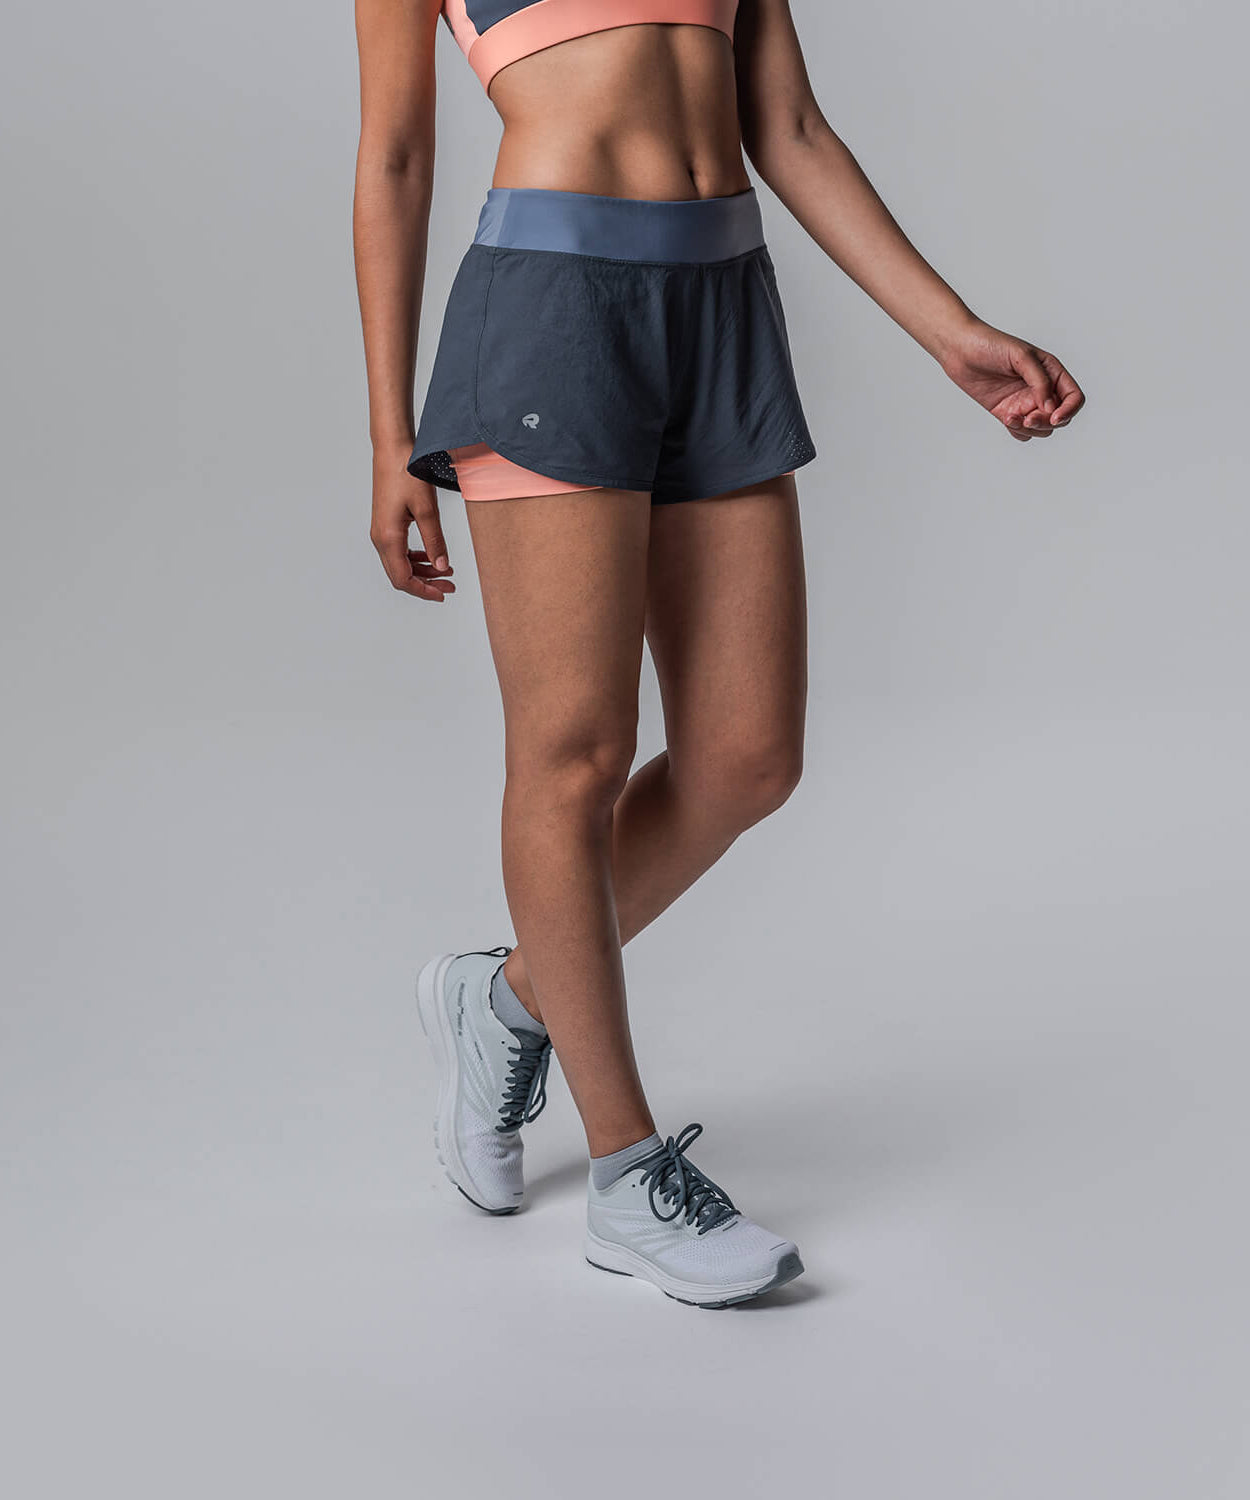 Enfold Woven Two In One Running Shorts | Women's Sports Shorts